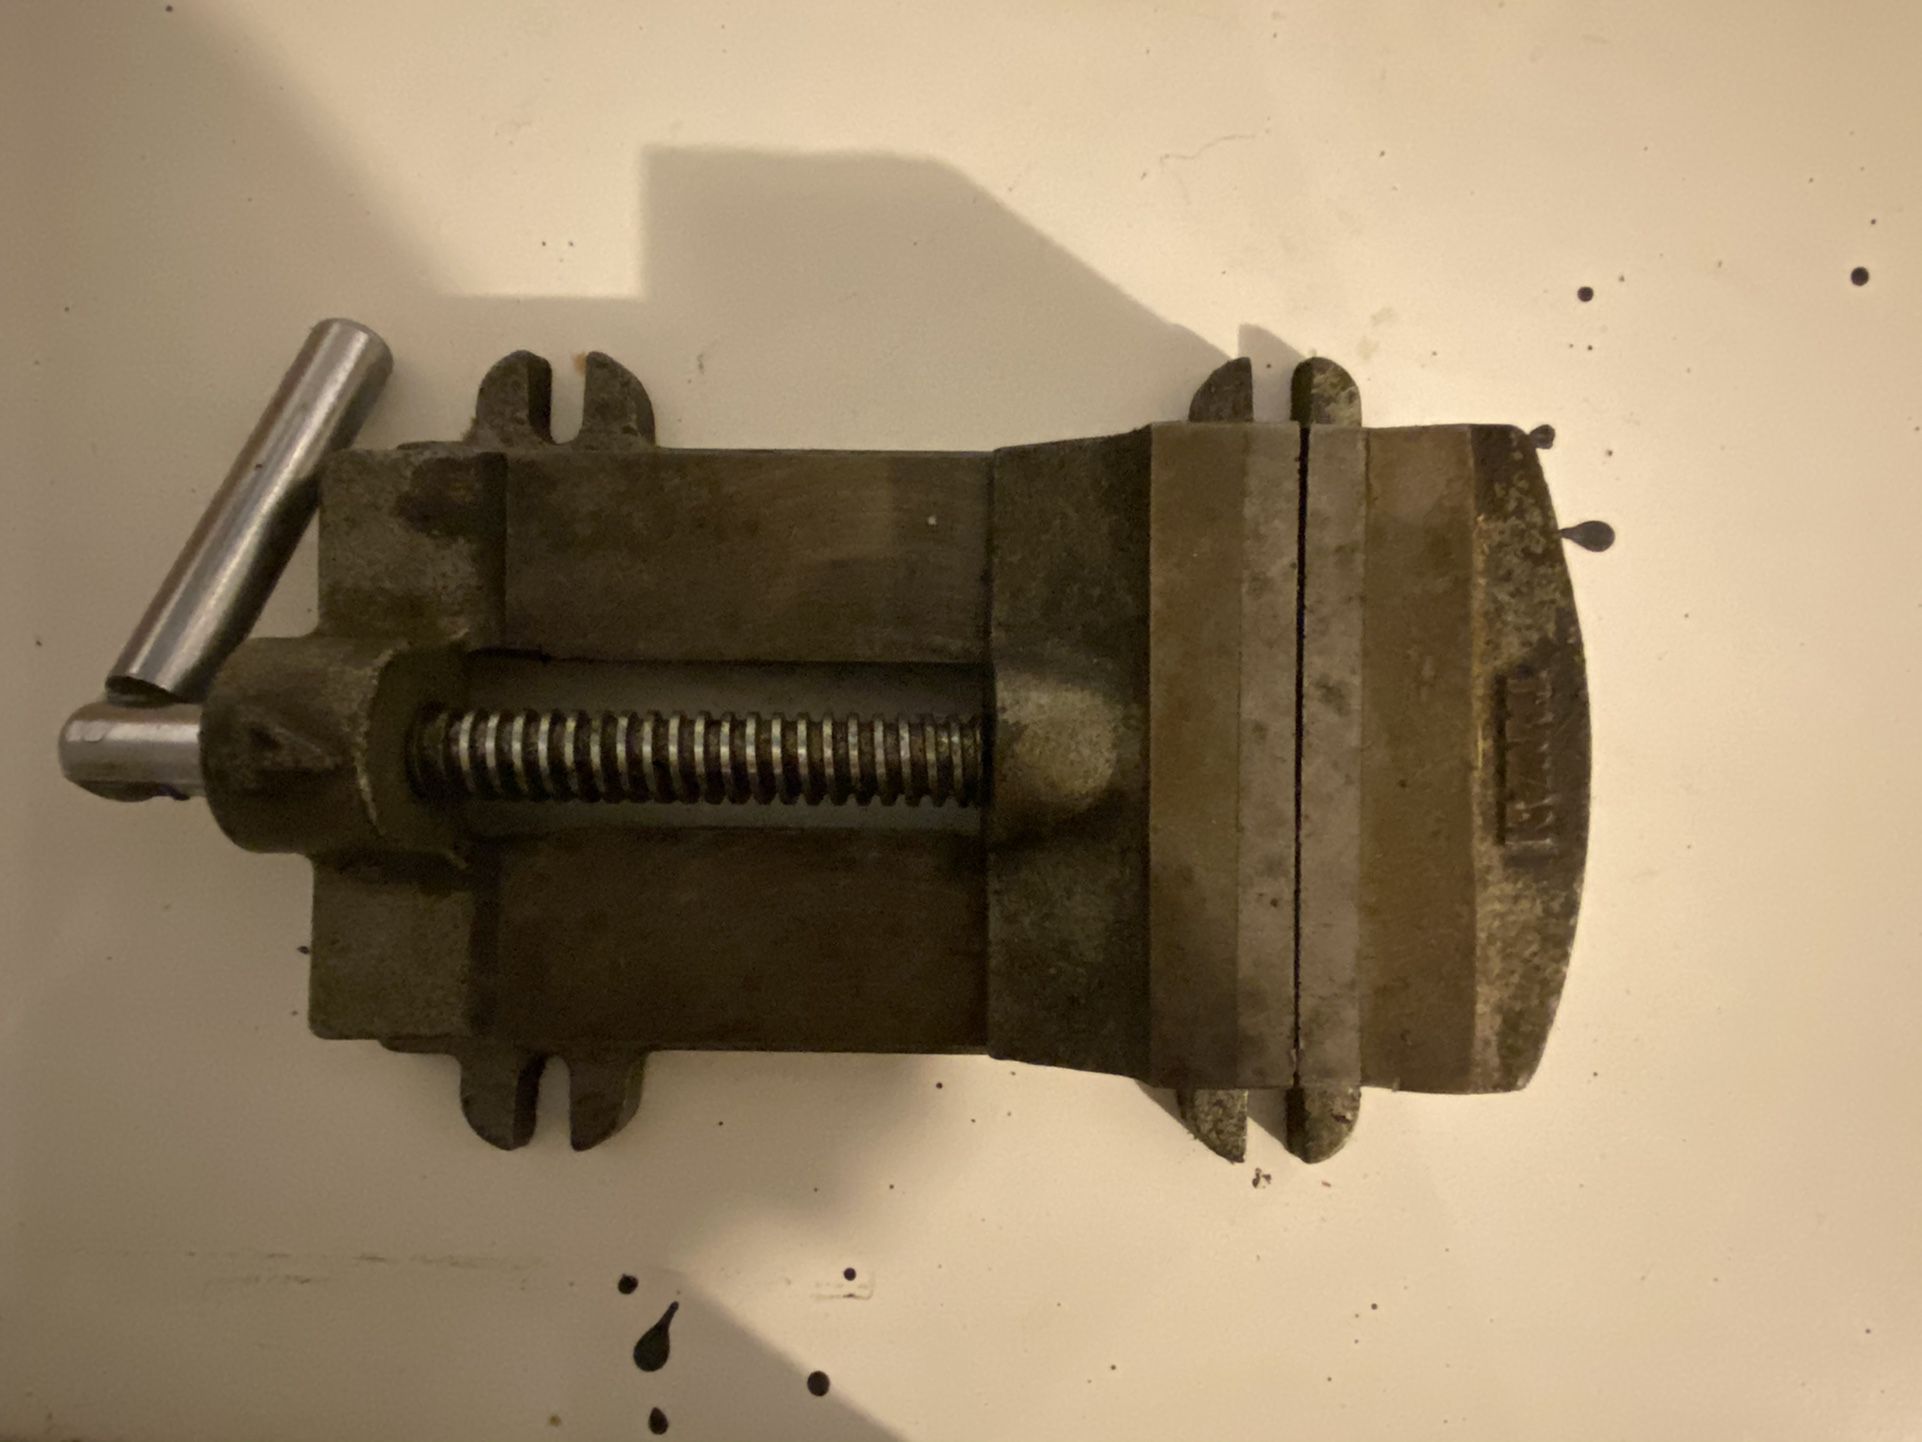 4” Mill or Drill Press Vise